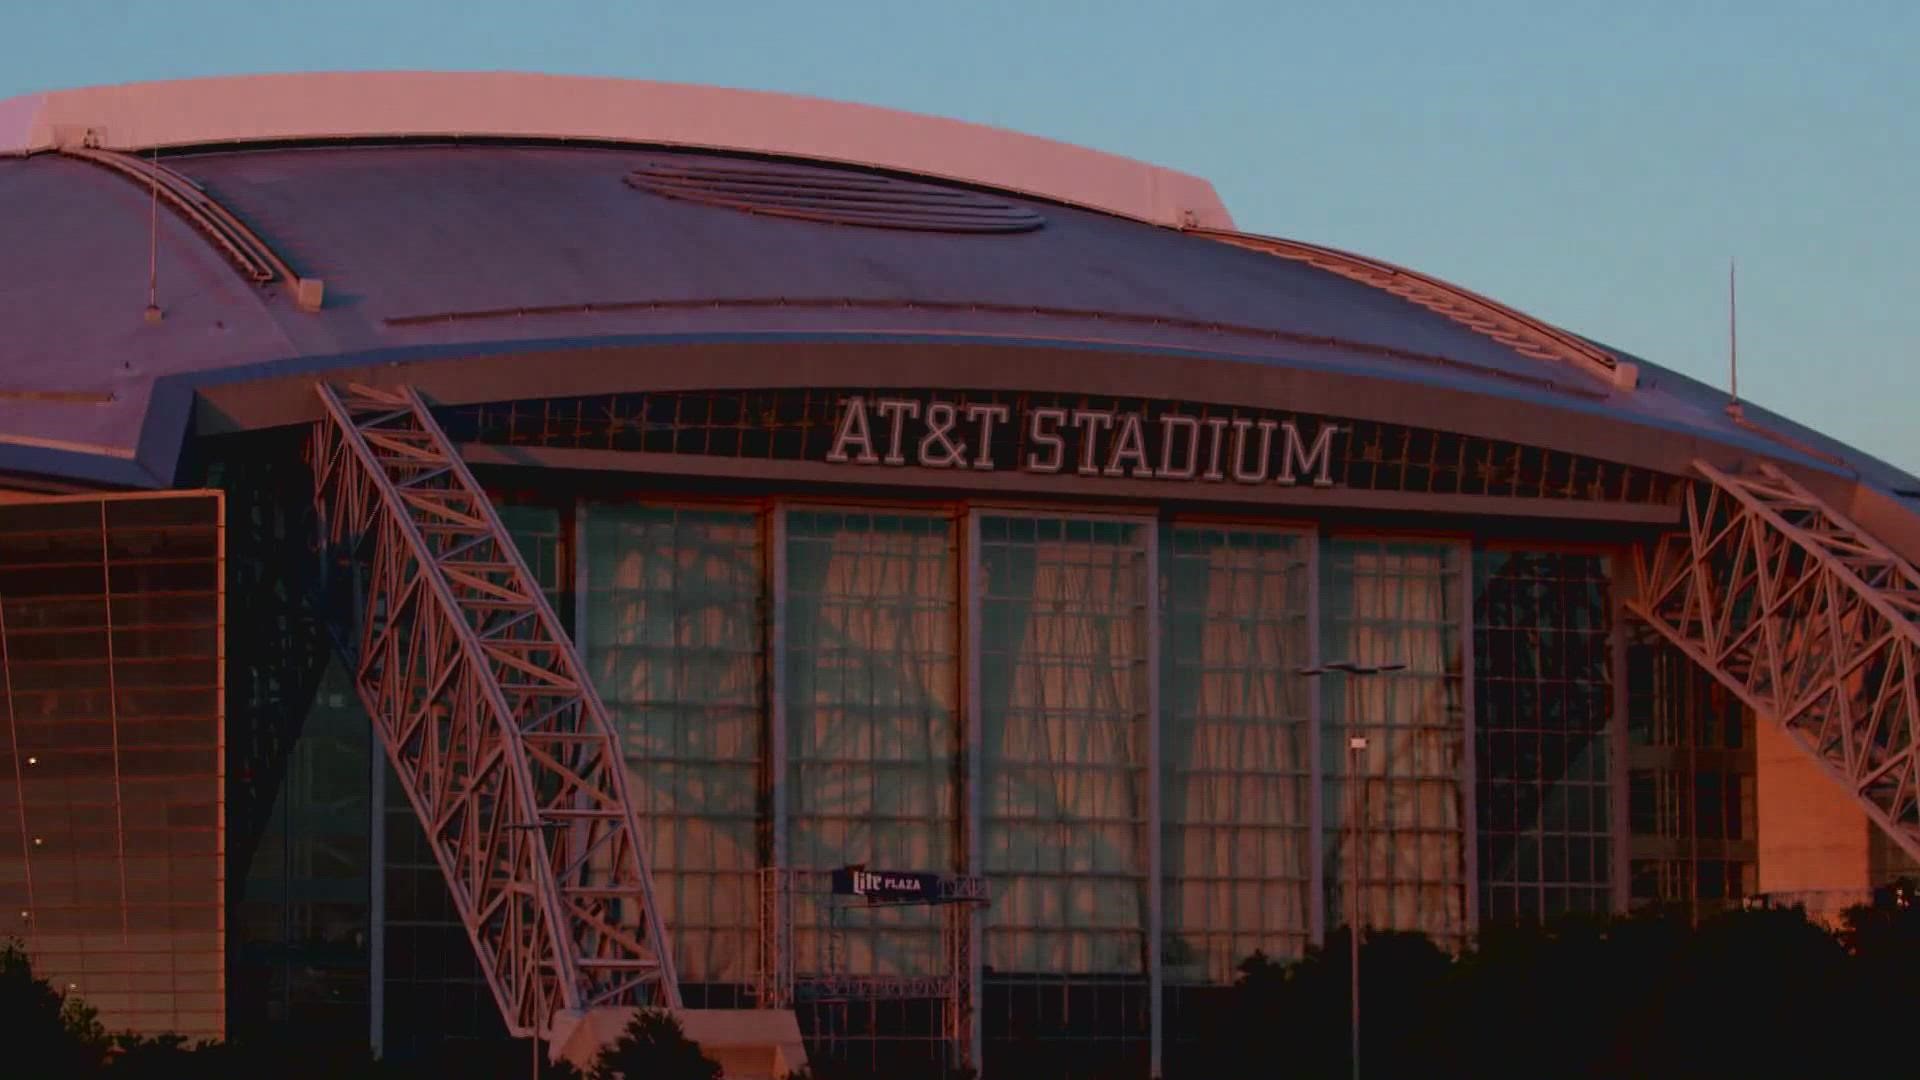 AT&T Stadium will host the FIFA World Cup in 2026.